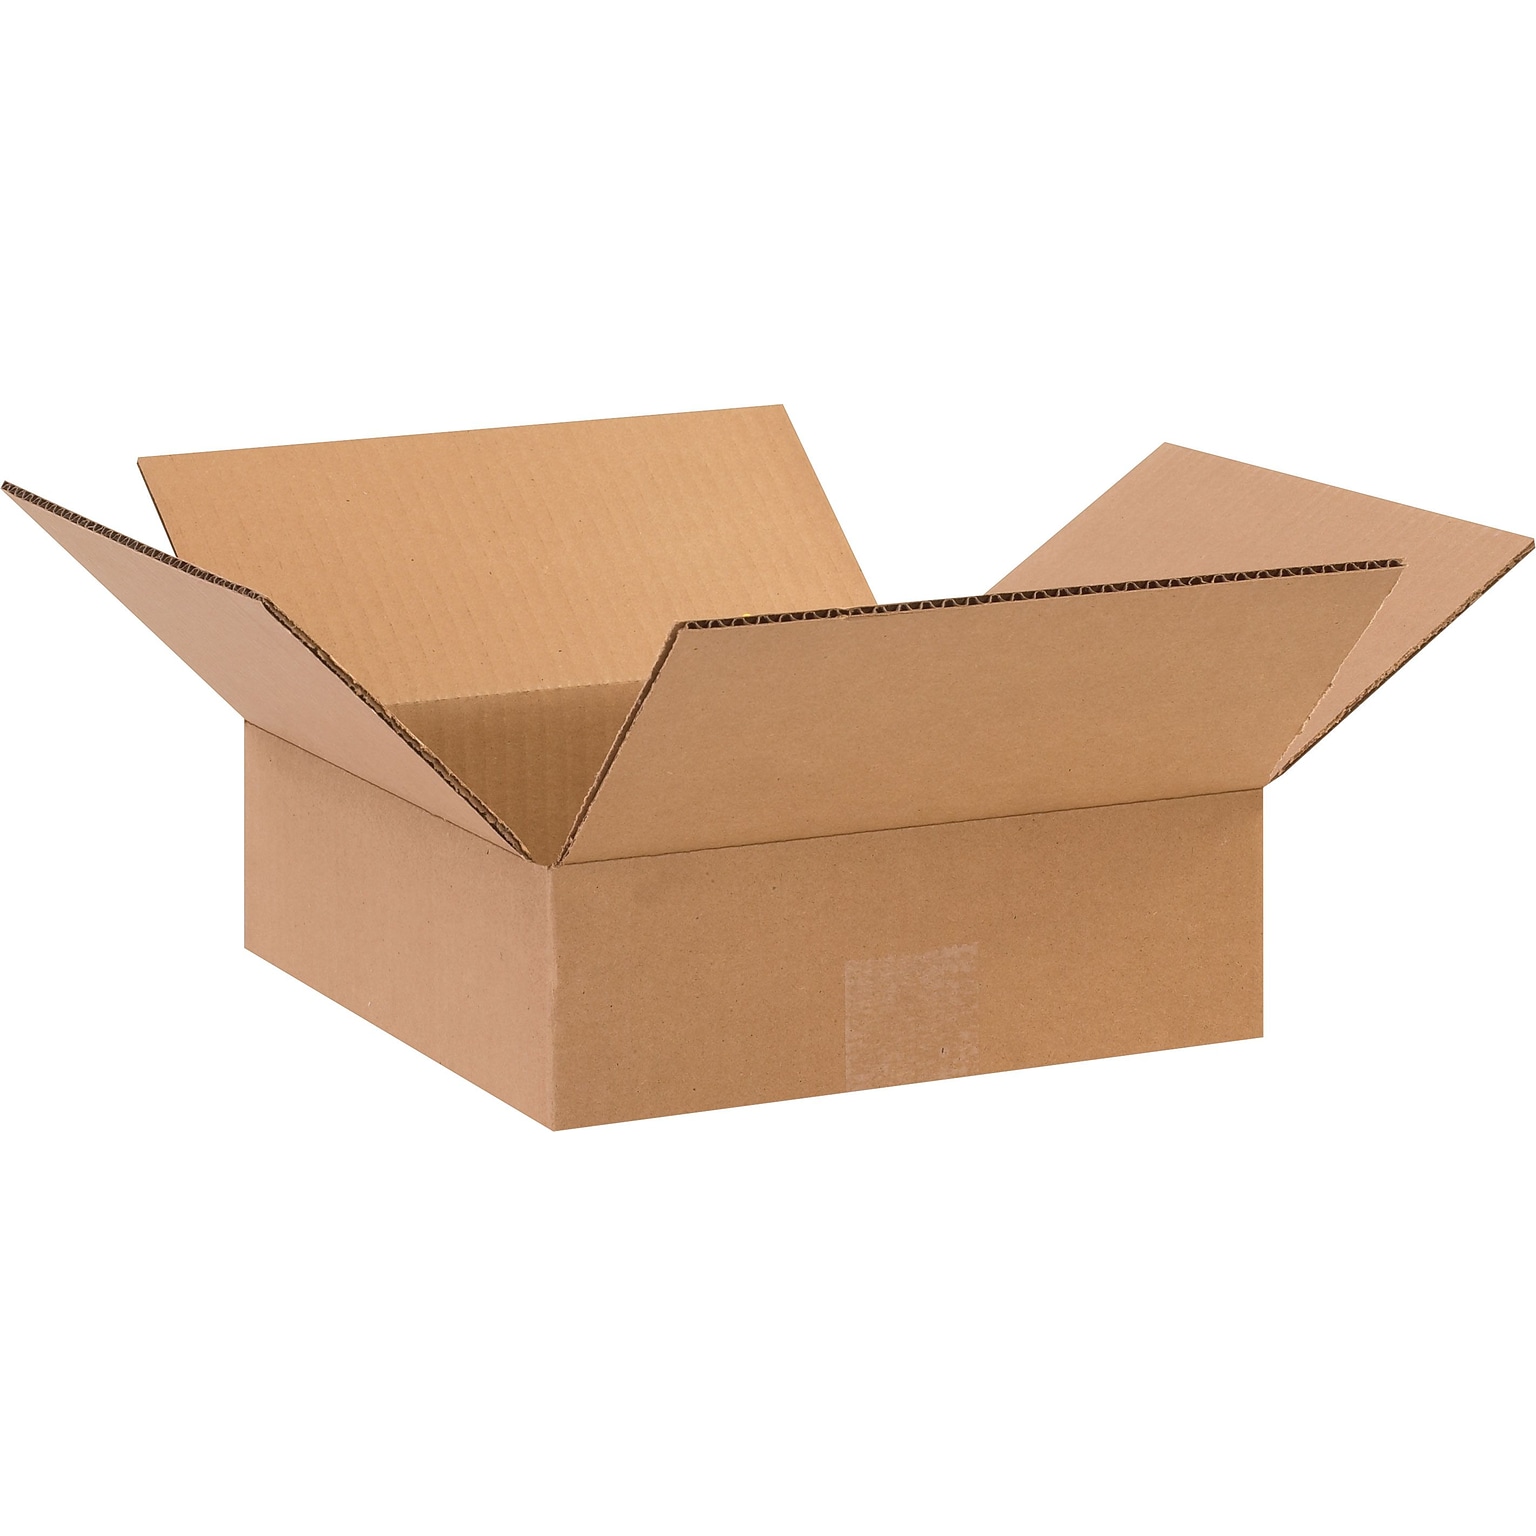 SI Products 10 x 10 x 3 Shipping Boxes, 32 ECT, Kraft, 25/Bundle (BS101003)